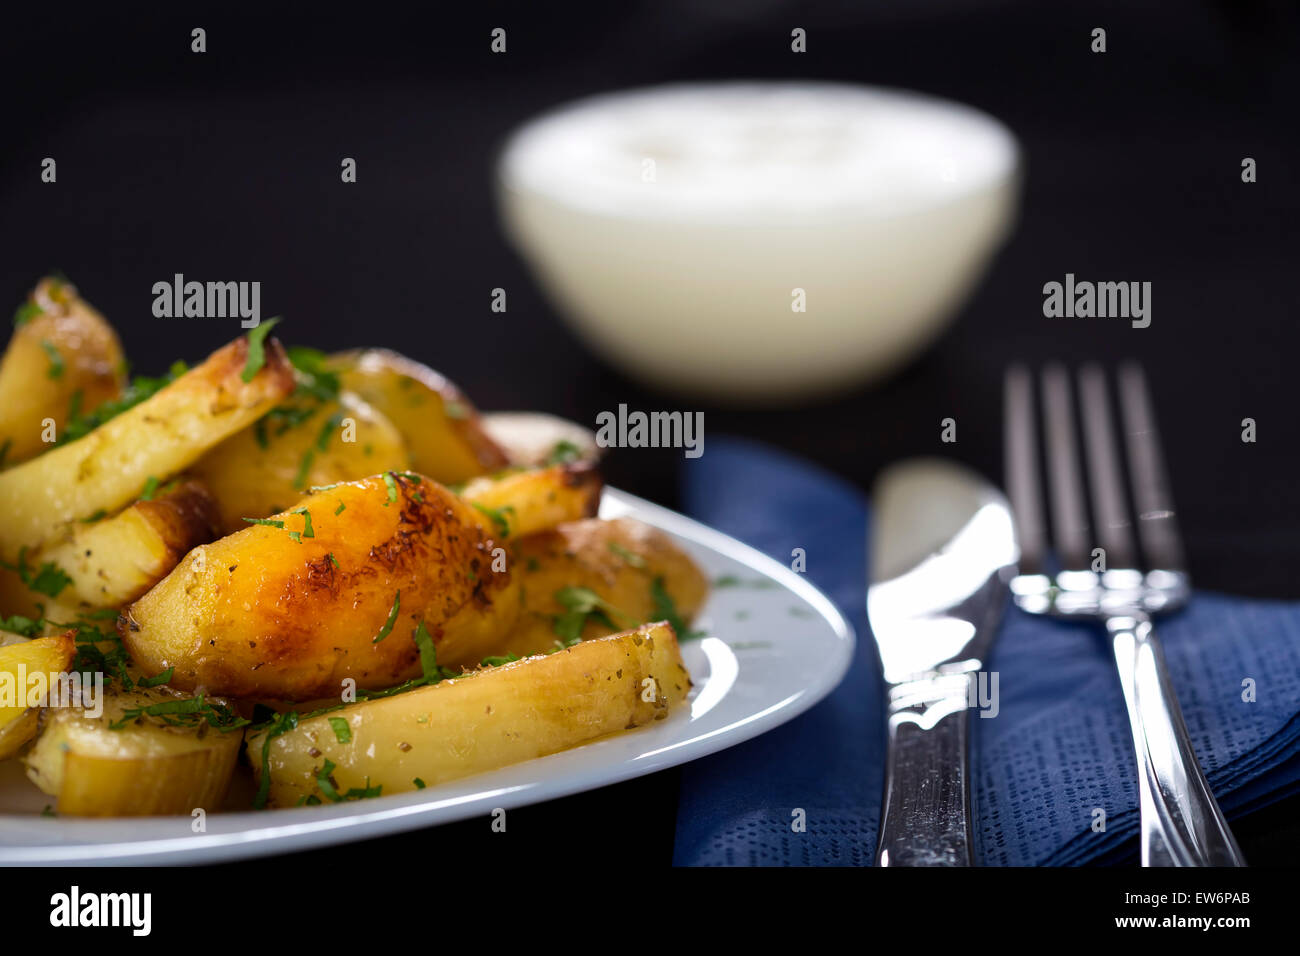 Baked potatoes with parsley on plate with fork and knife Stock Photo